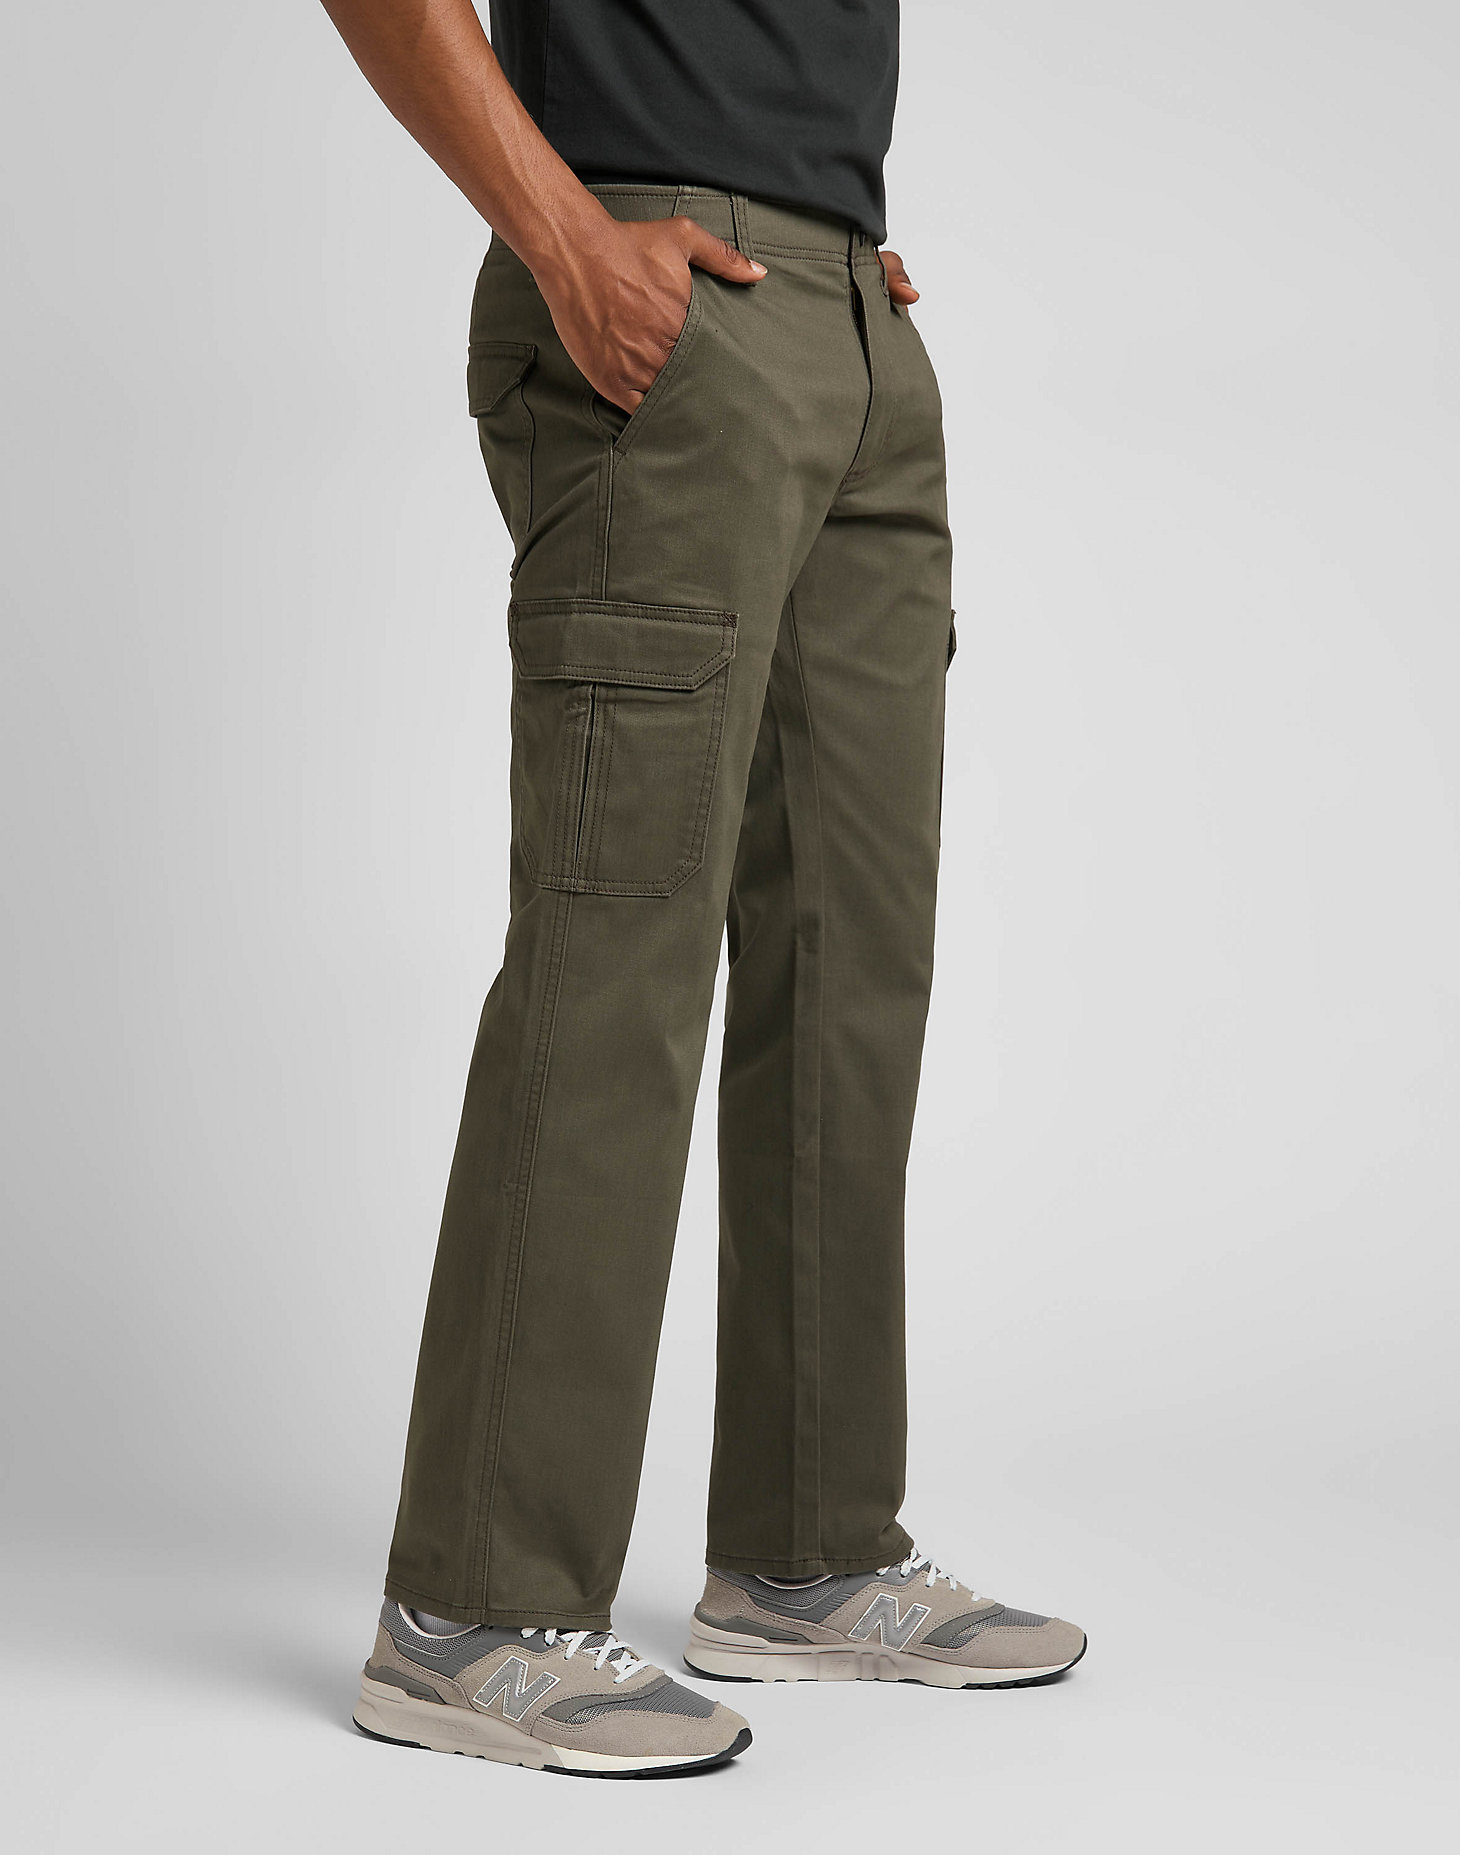 Cargo Pant Xc in Forest alternative view 3